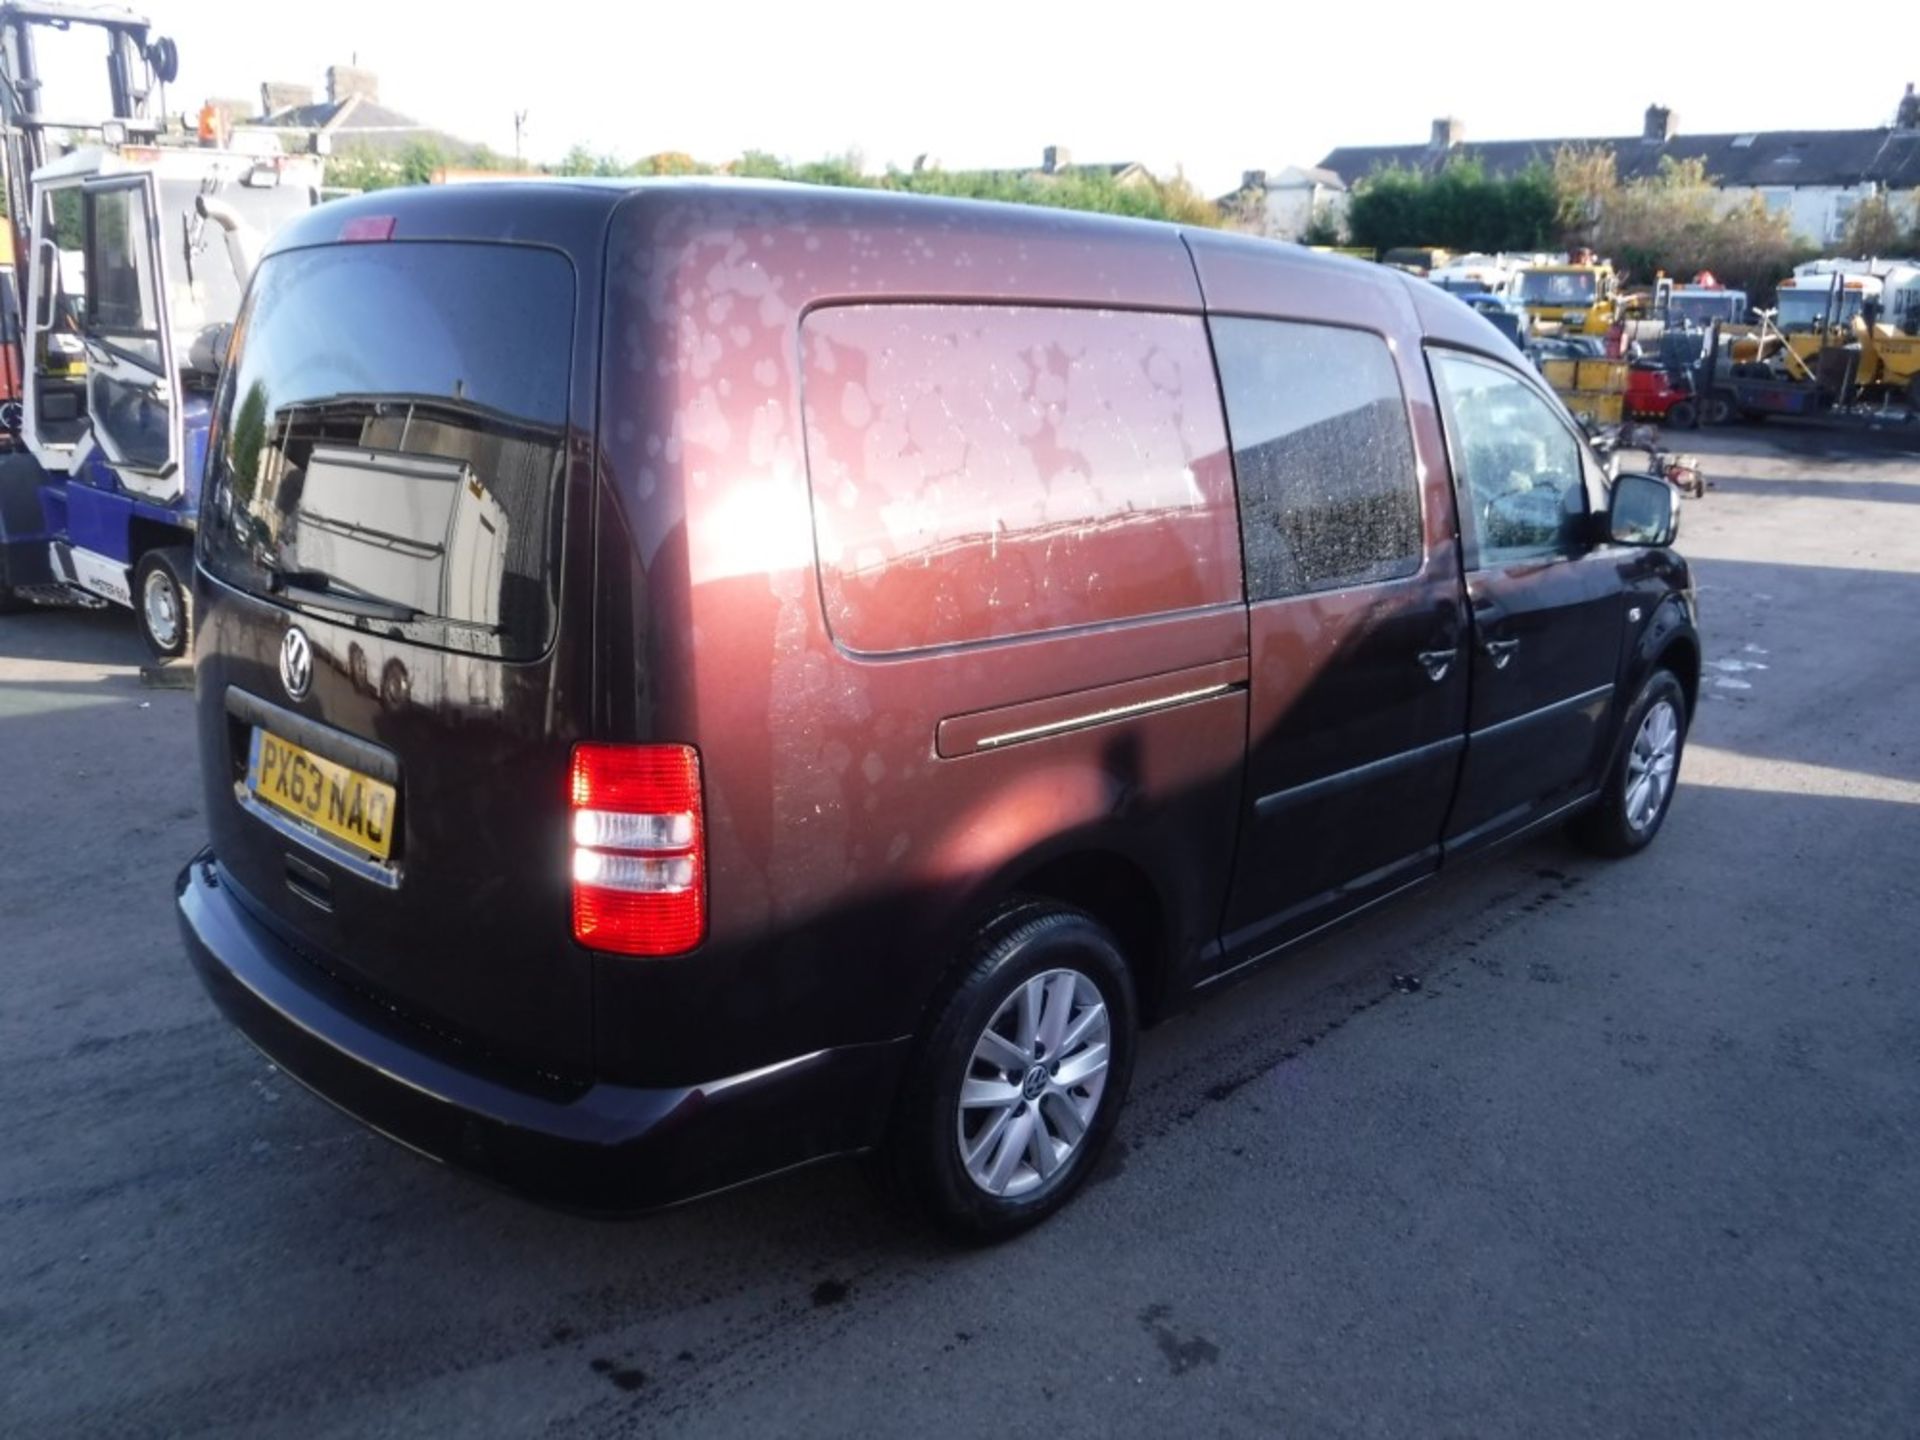 63 reg VW CADDY MAXI C20 TDI, 1ST REG 10/13, 118238M WARRANTED, V5 HERE, 1 OWNER FROM NEW [+ VAT] - Image 4 of 6